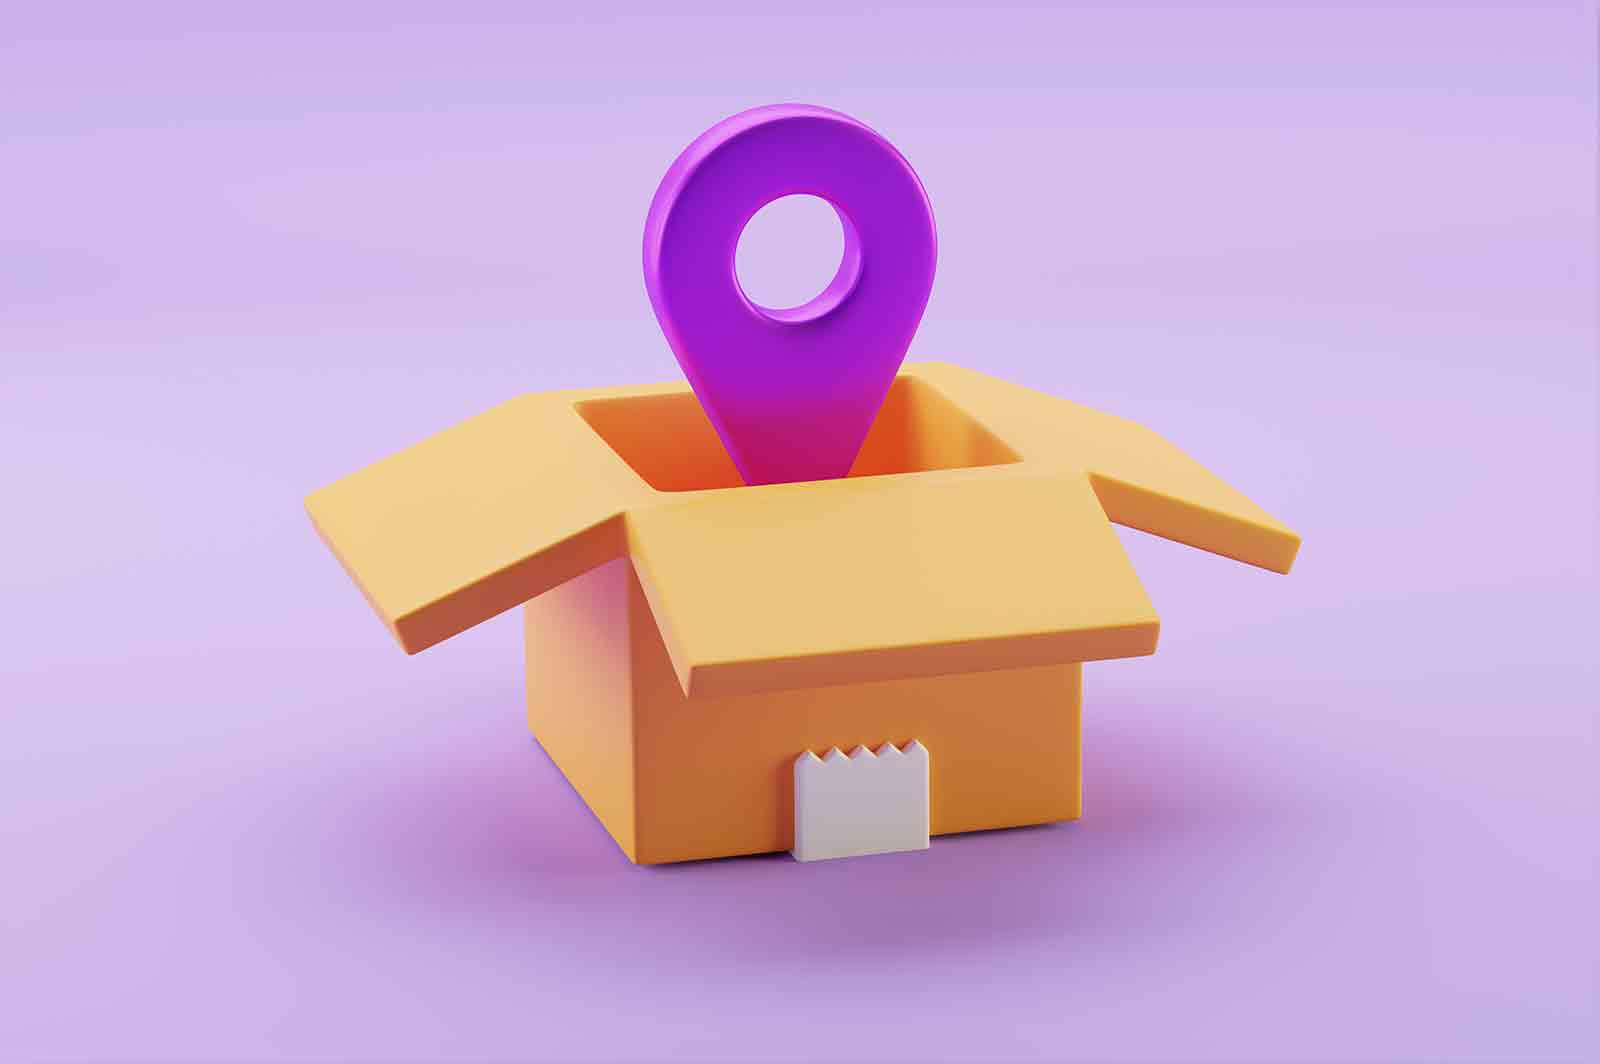 Delivery packaging 3d rendered icon illustration. Open box with location pin. Worldwide shipping. Delivery service concept